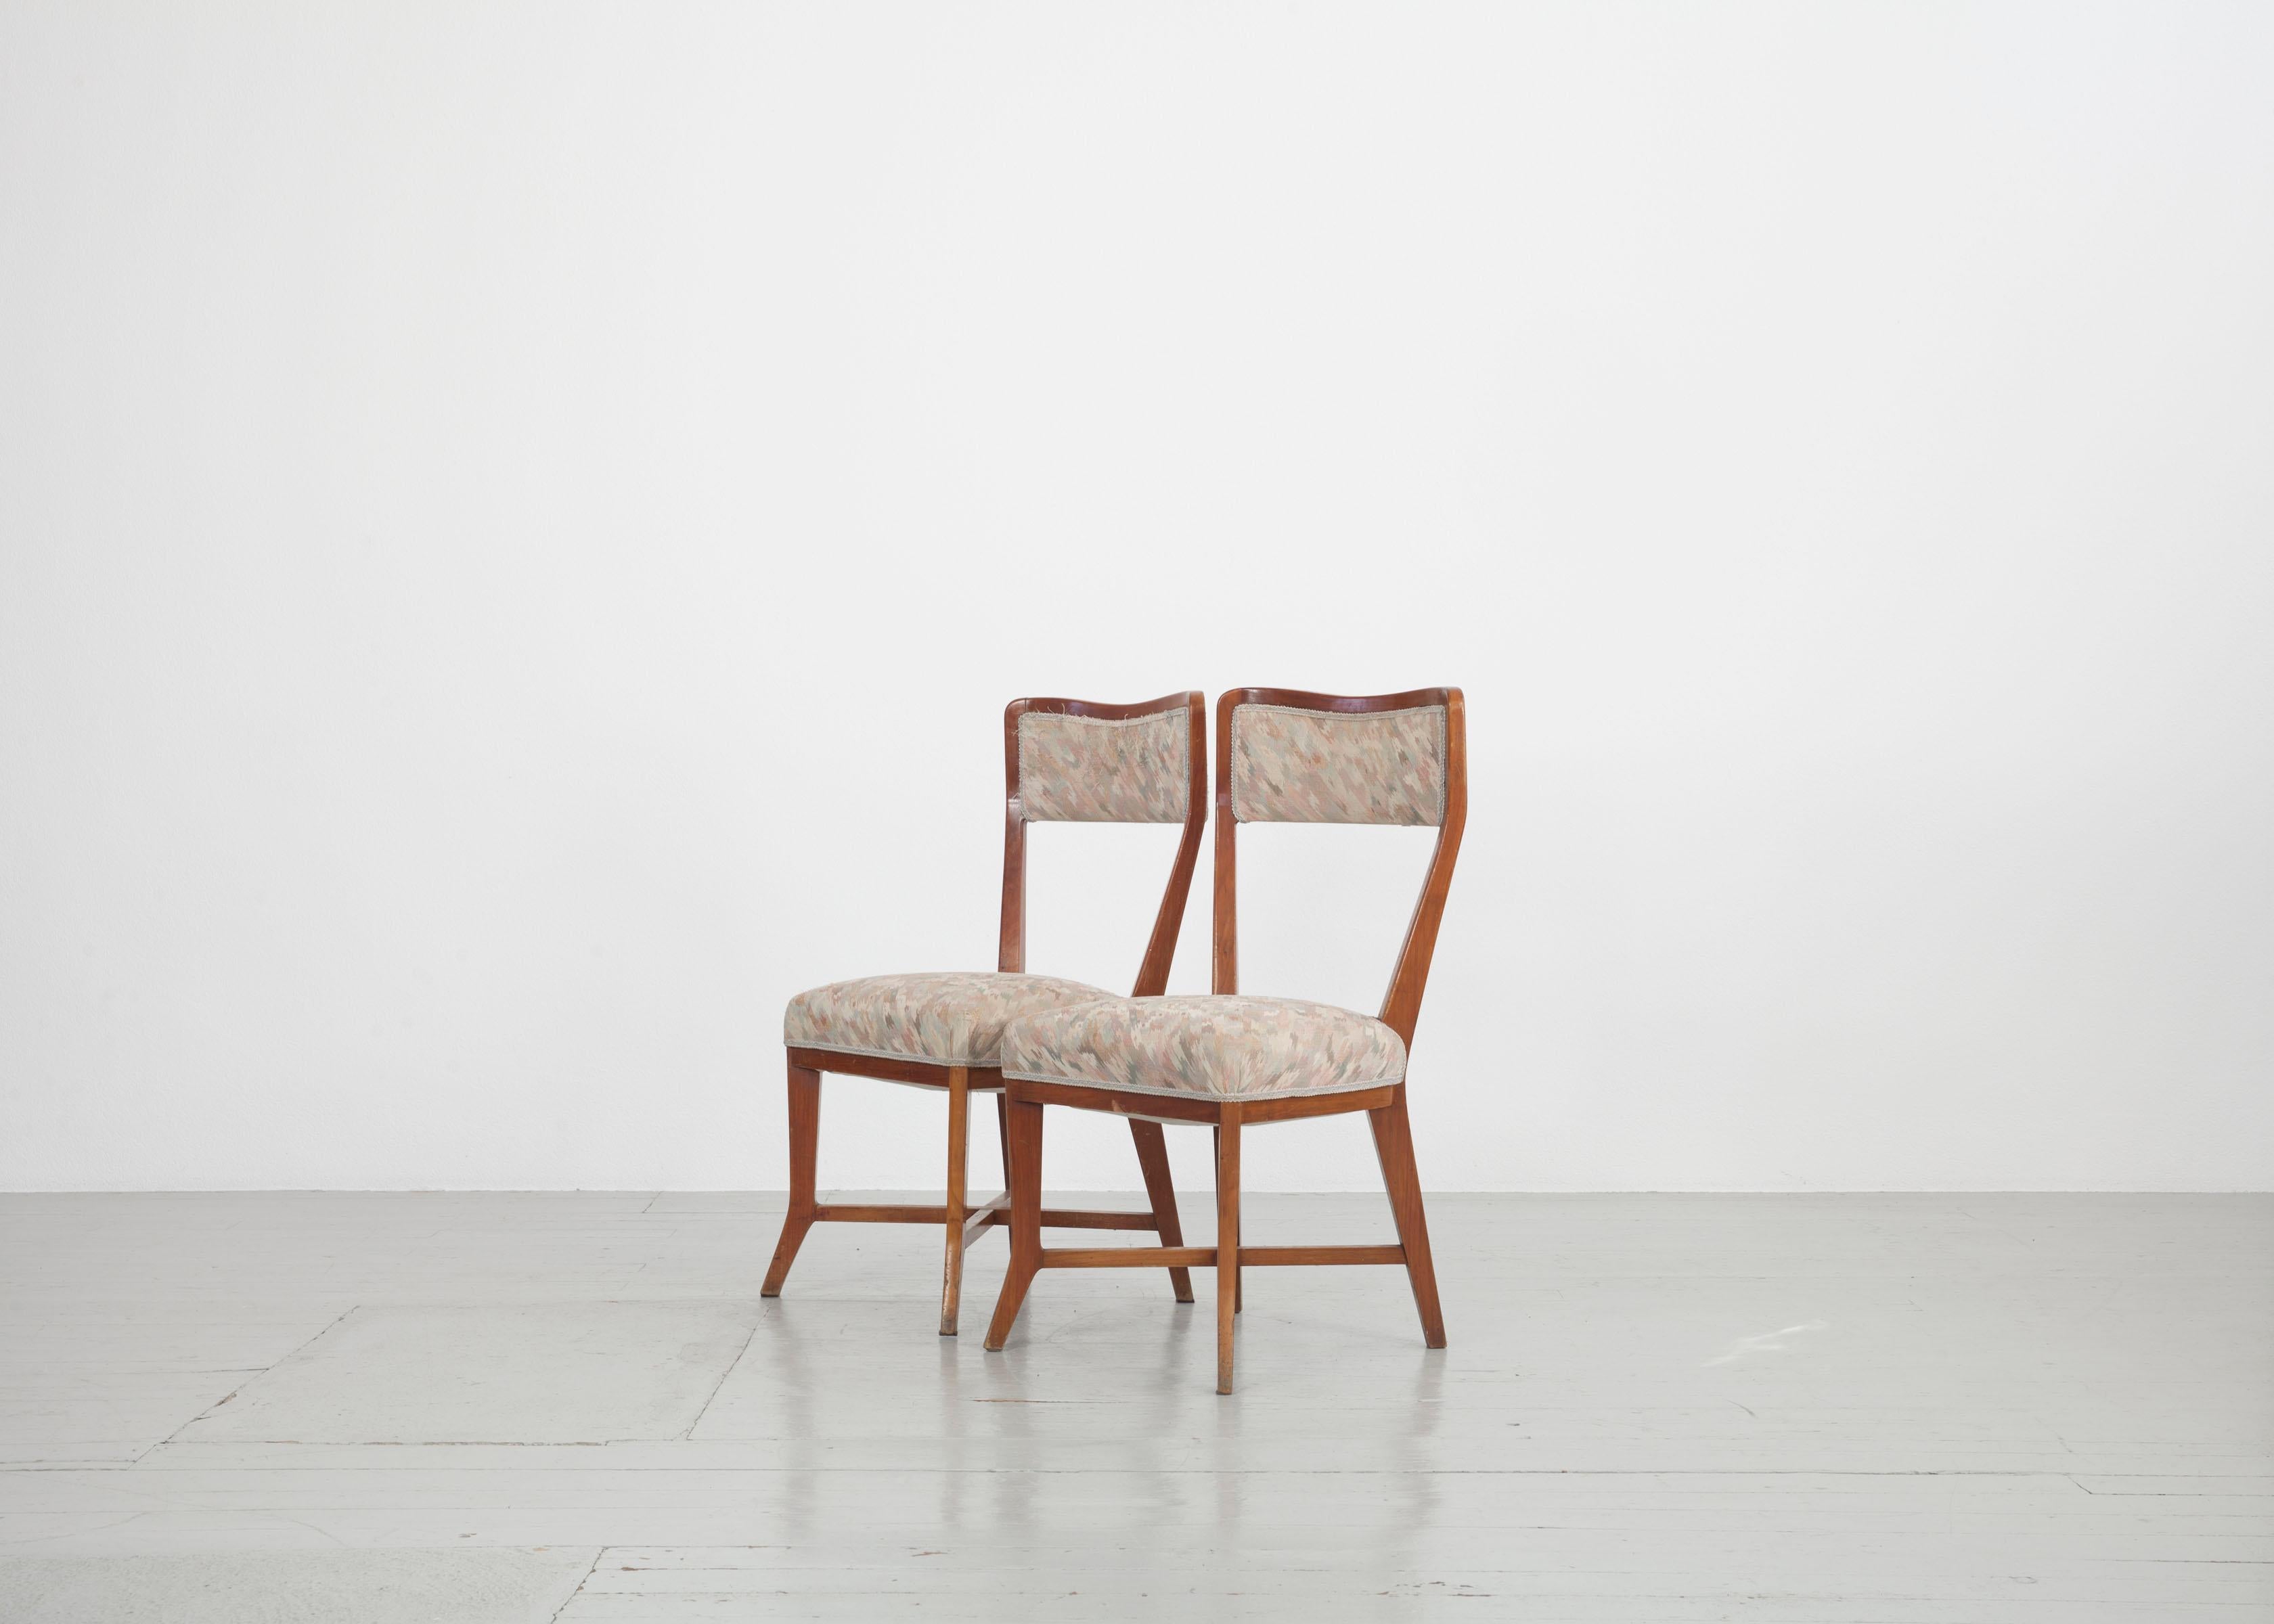 Set of 6 Melchiorre Bega Chairs Made of Cherrywood, Italy, 1950s For Sale 3